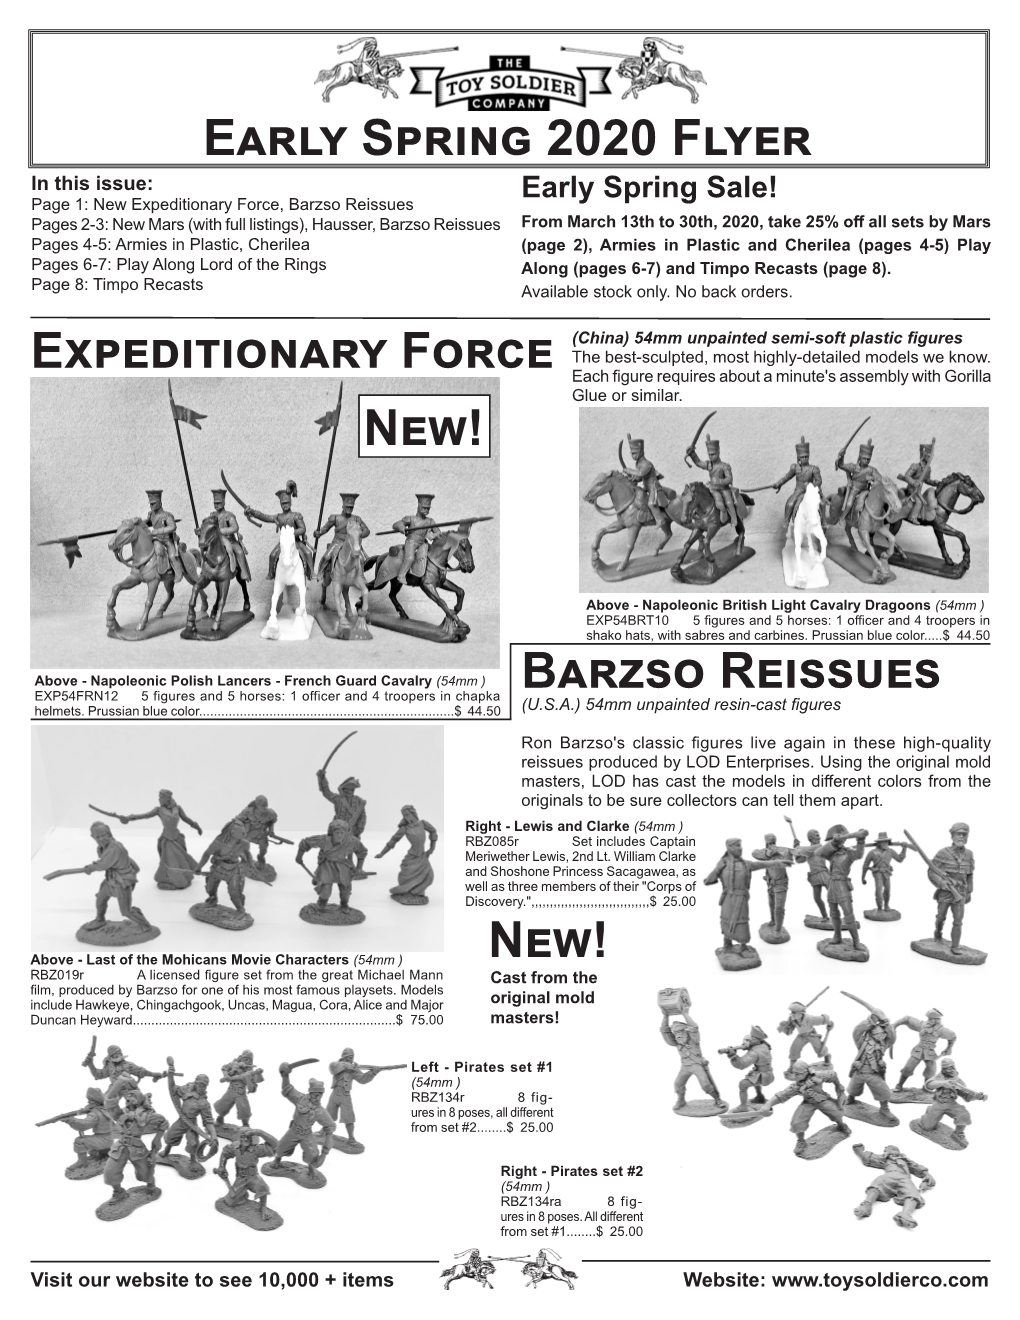 Expeditionary Force Early Spring 2020